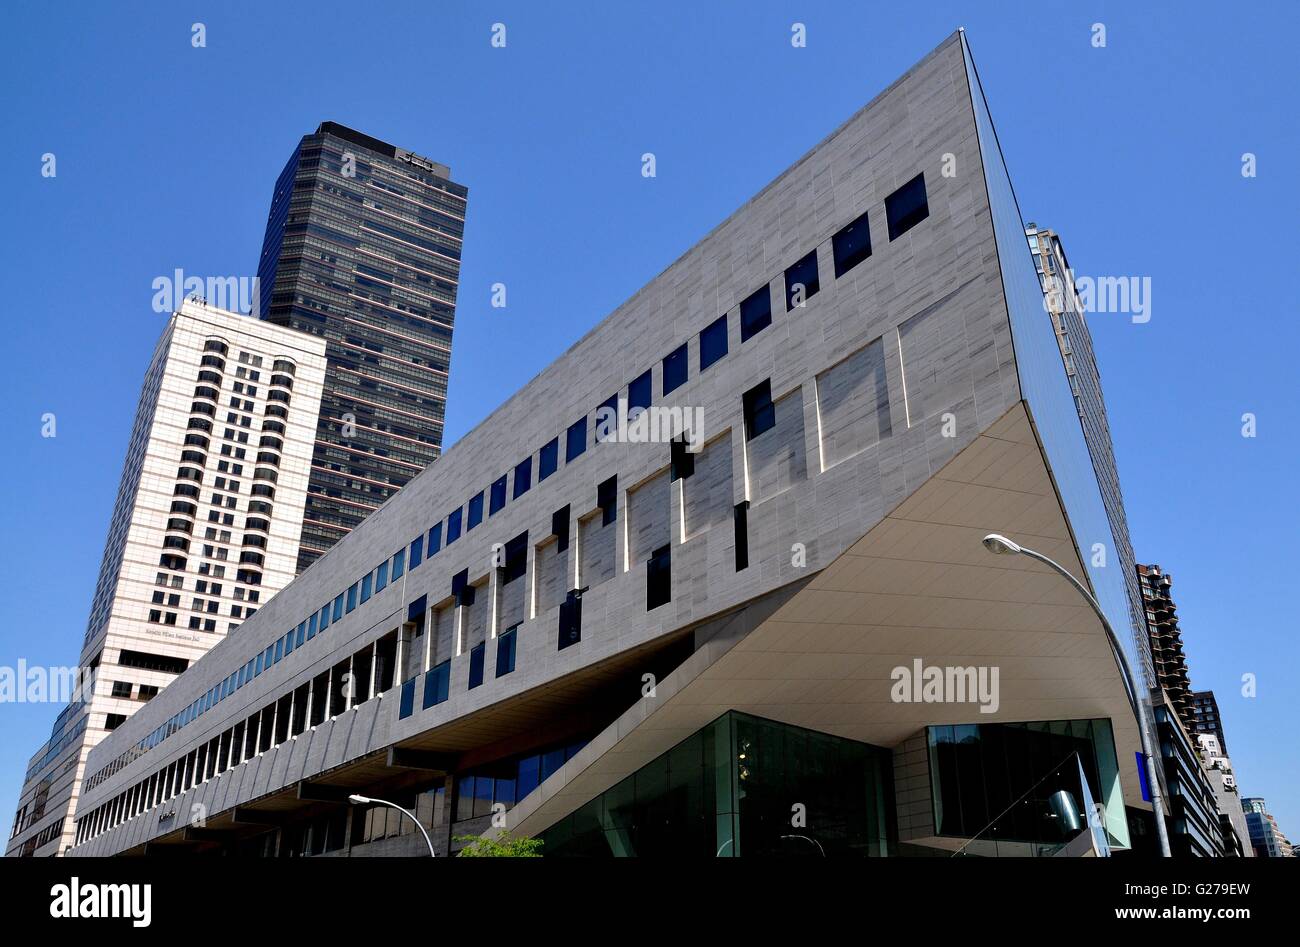 New York City: Alice Tully Hall und der Juilliard School of Music im Lincoln Center for the Performing Arts Stockfoto